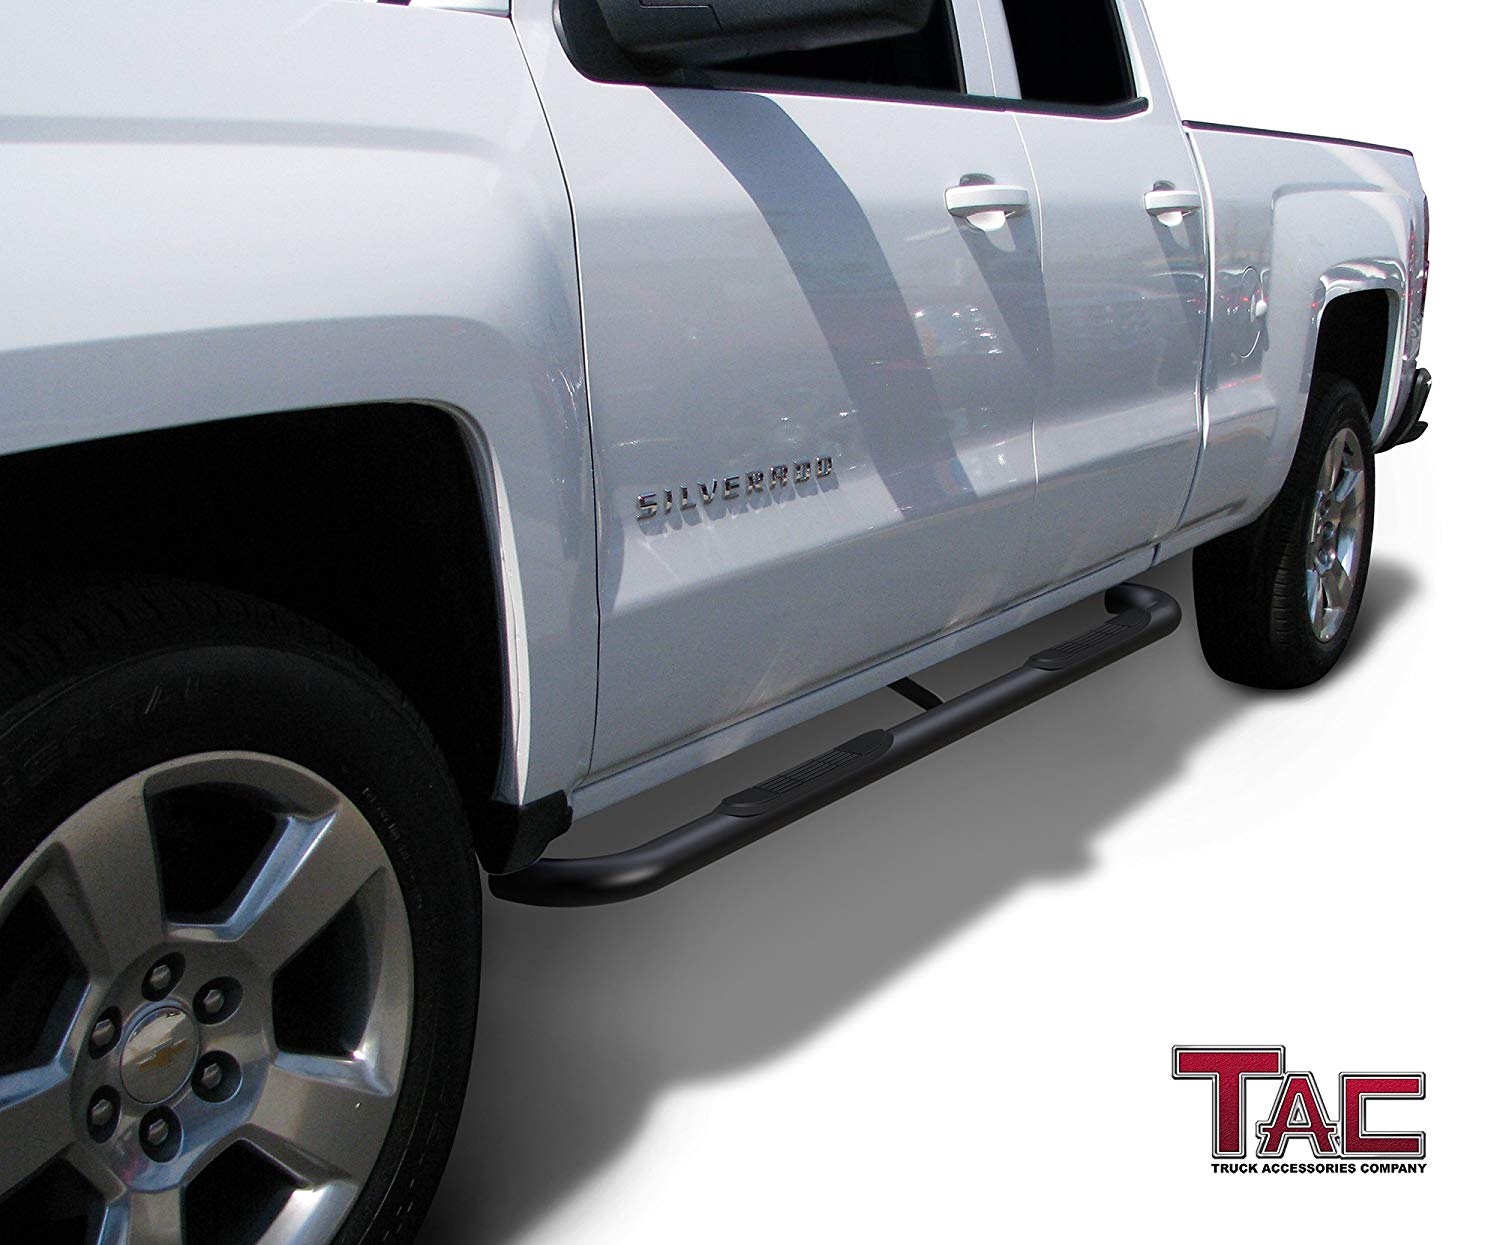 TAC Gloss Black 3" Side Steps For Chevy Silverado/GMC Sierra 1999-2019 1500 Models & 1999-2019 2500/3500 Models Extended/Double Cab (Excl. C/K"Classic") Truck | Running Boards | Nerf Bars | Side Bars - 0